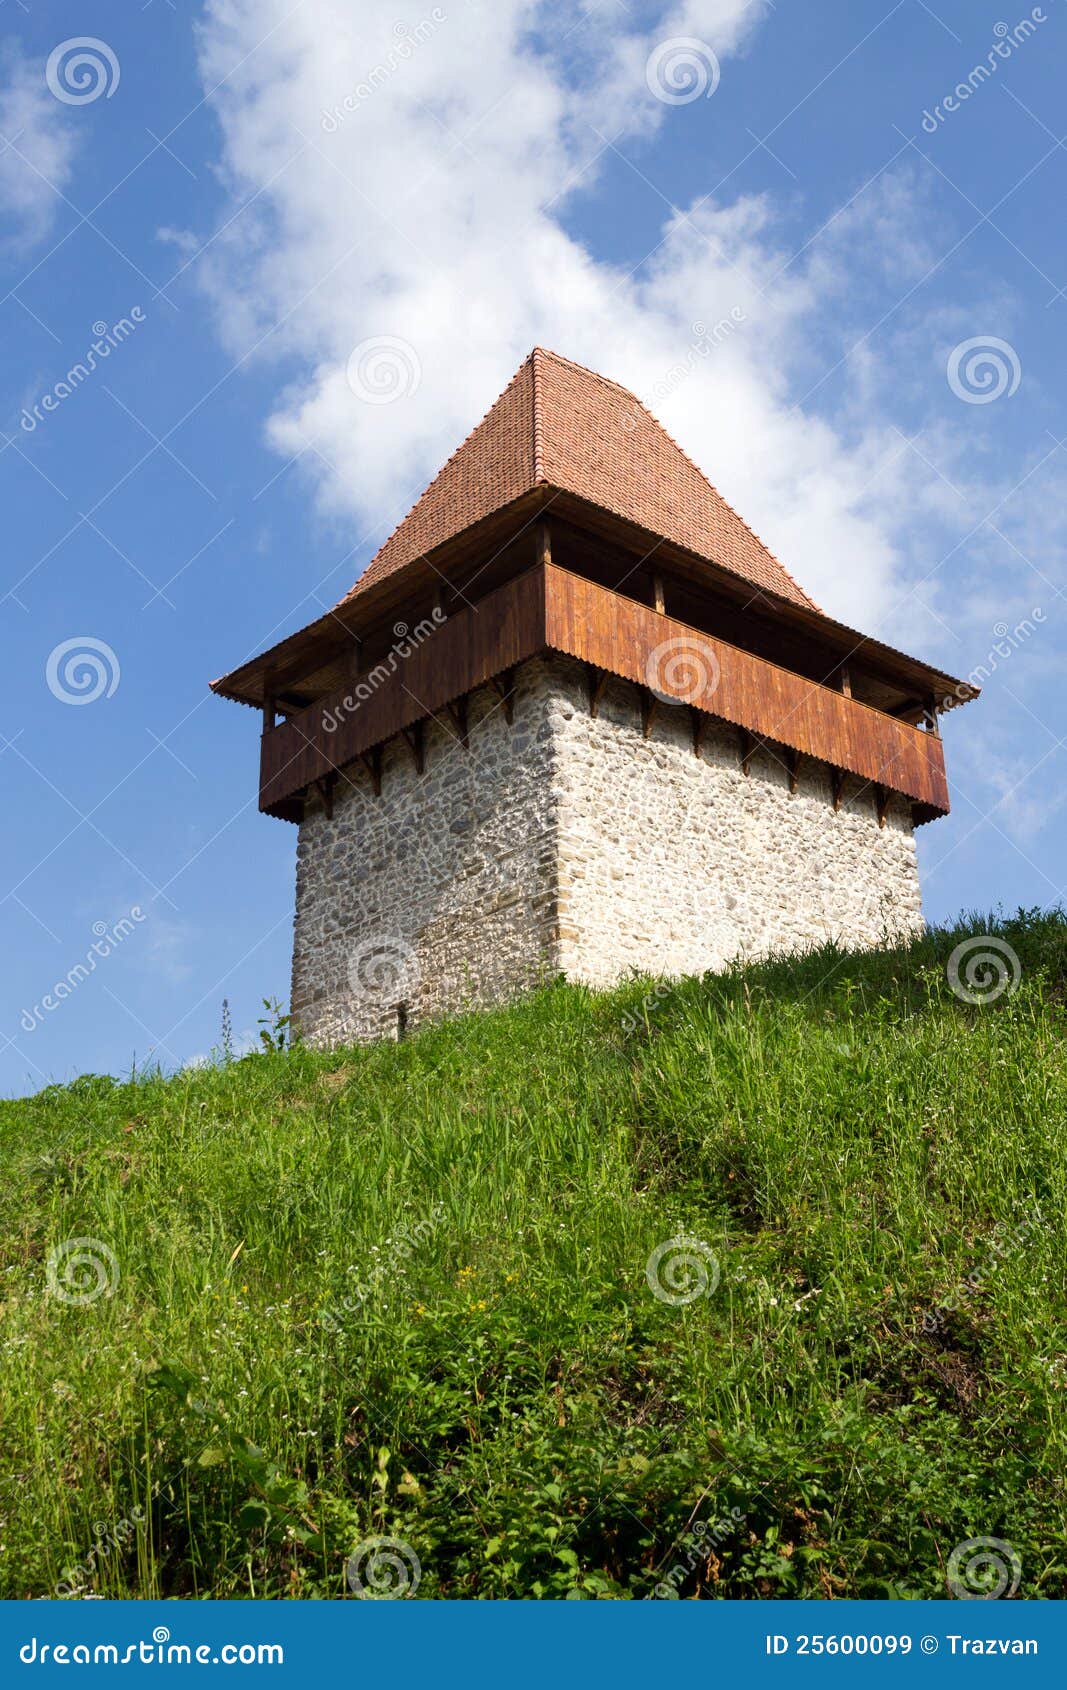 Medieval Fortress Tower stock image. Image of bastion - 25600099